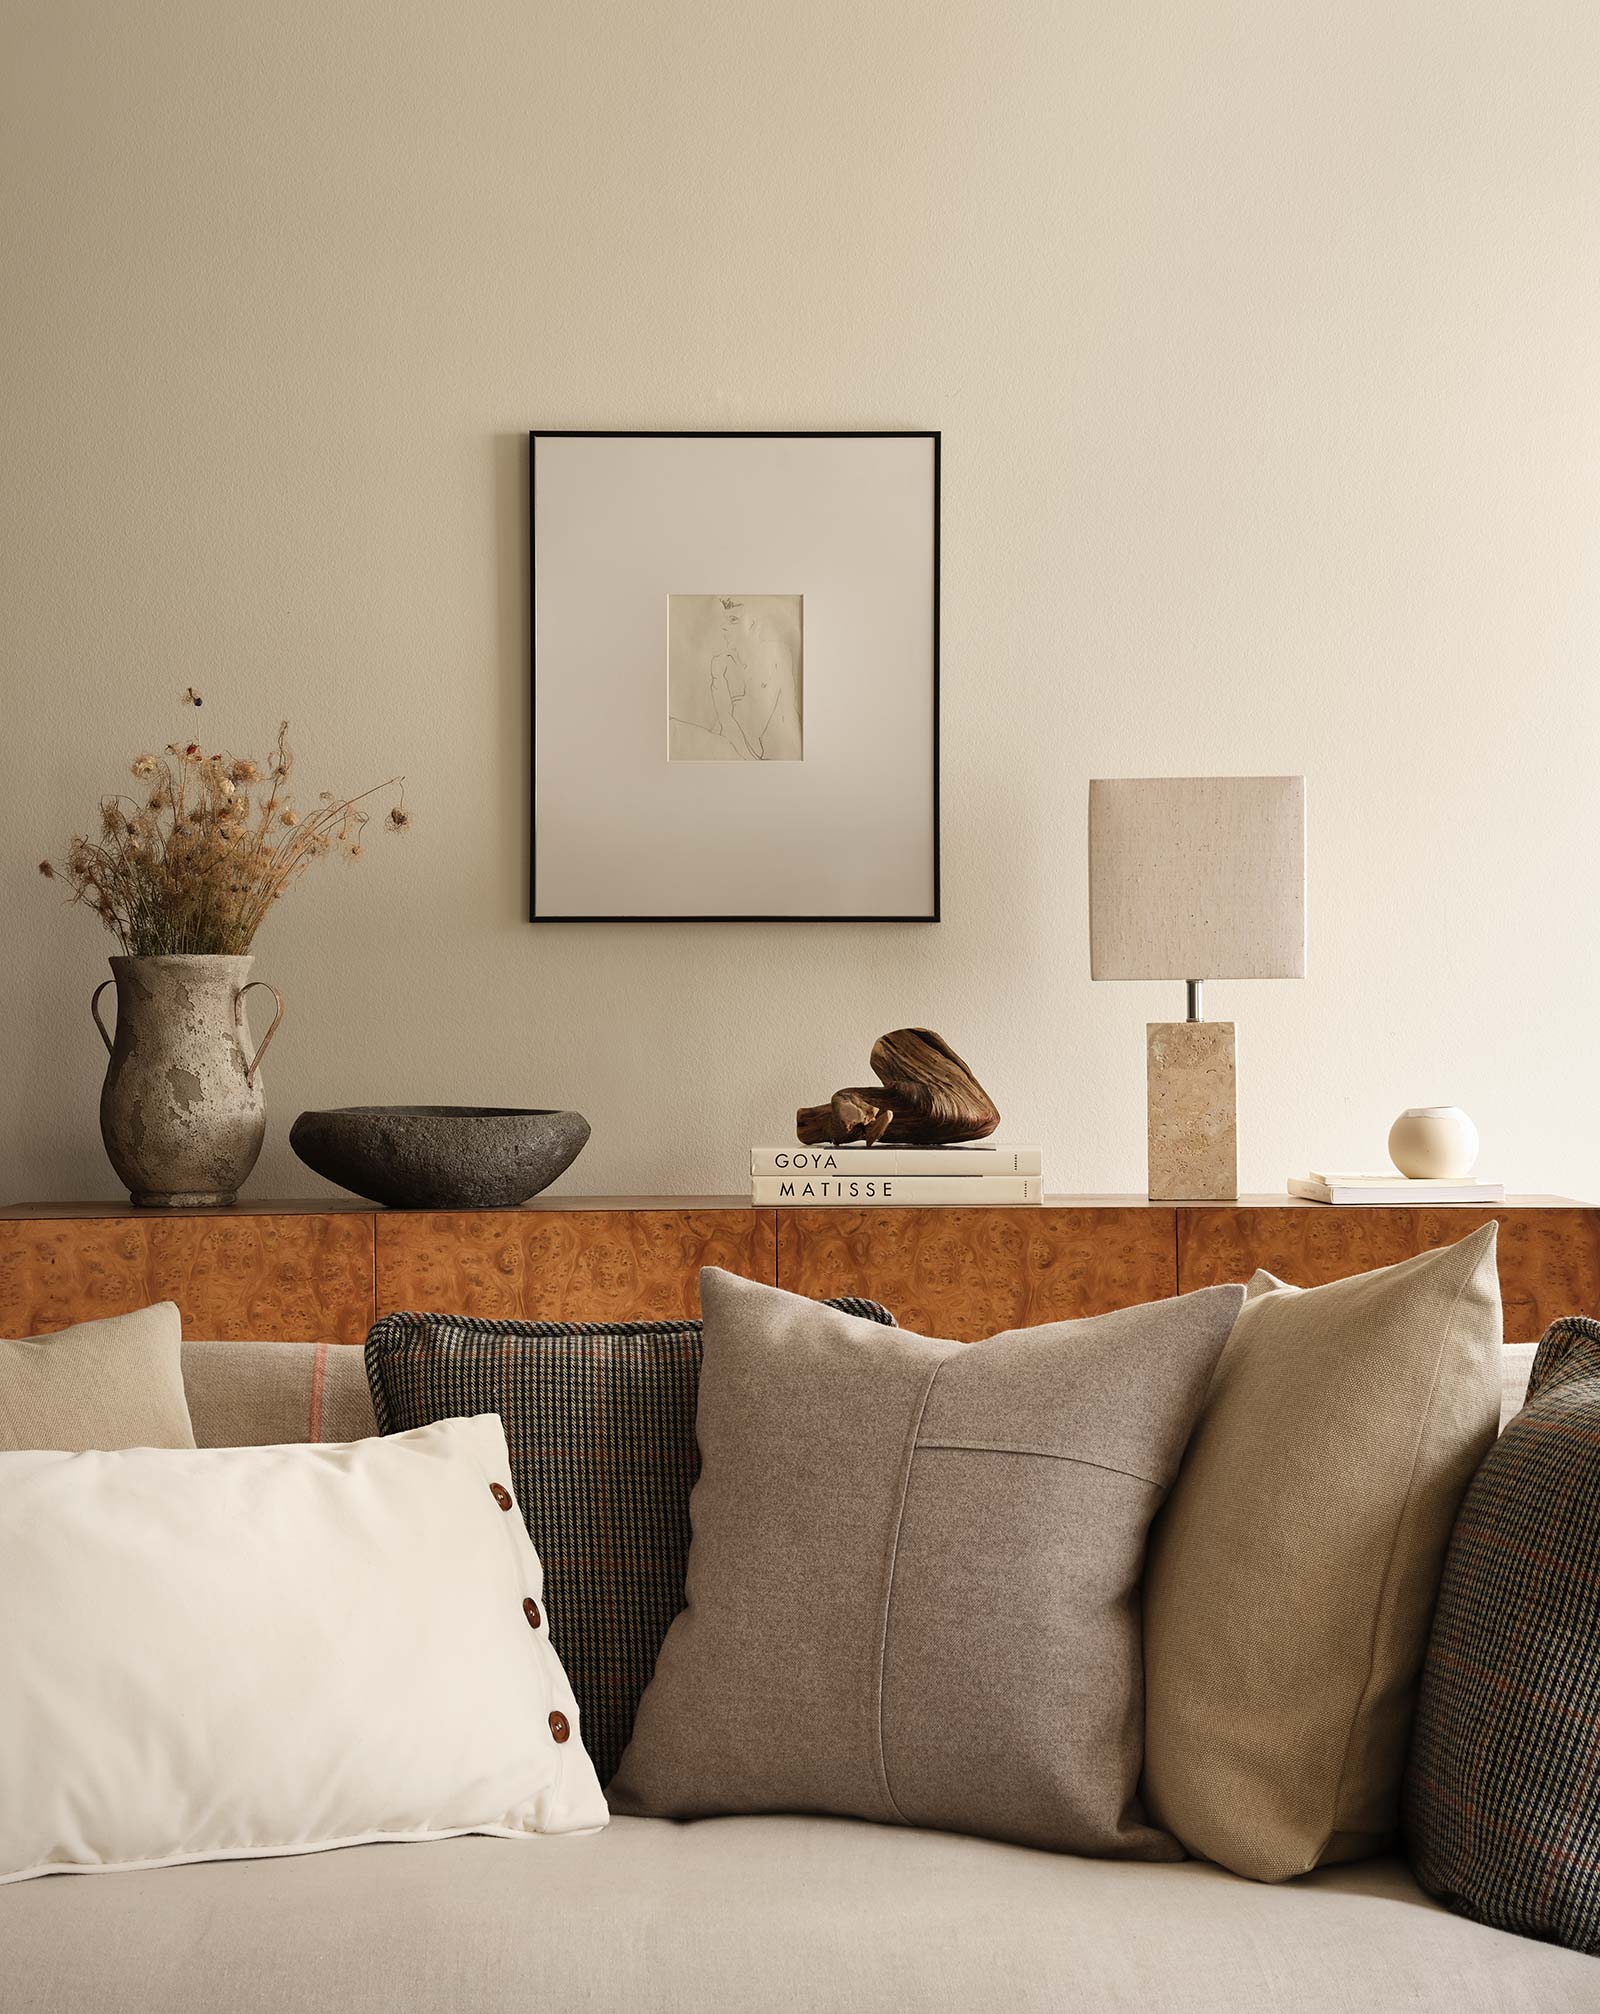 Fall design trends from Zara Home